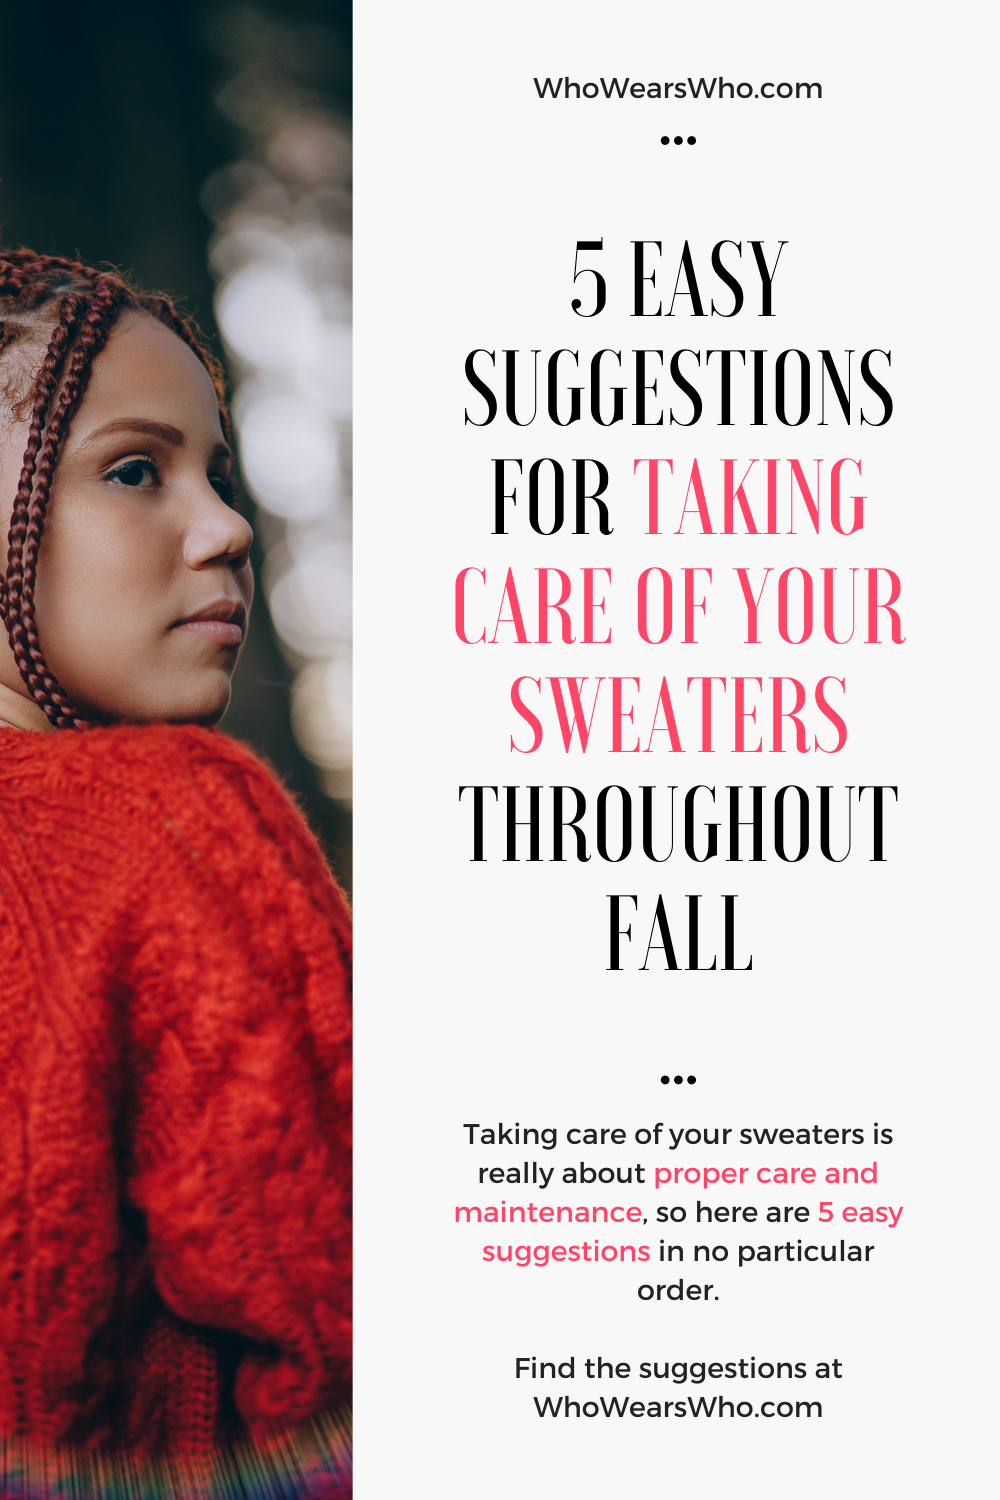 5 easy suggestions for taking care of your sweaters throughout fall